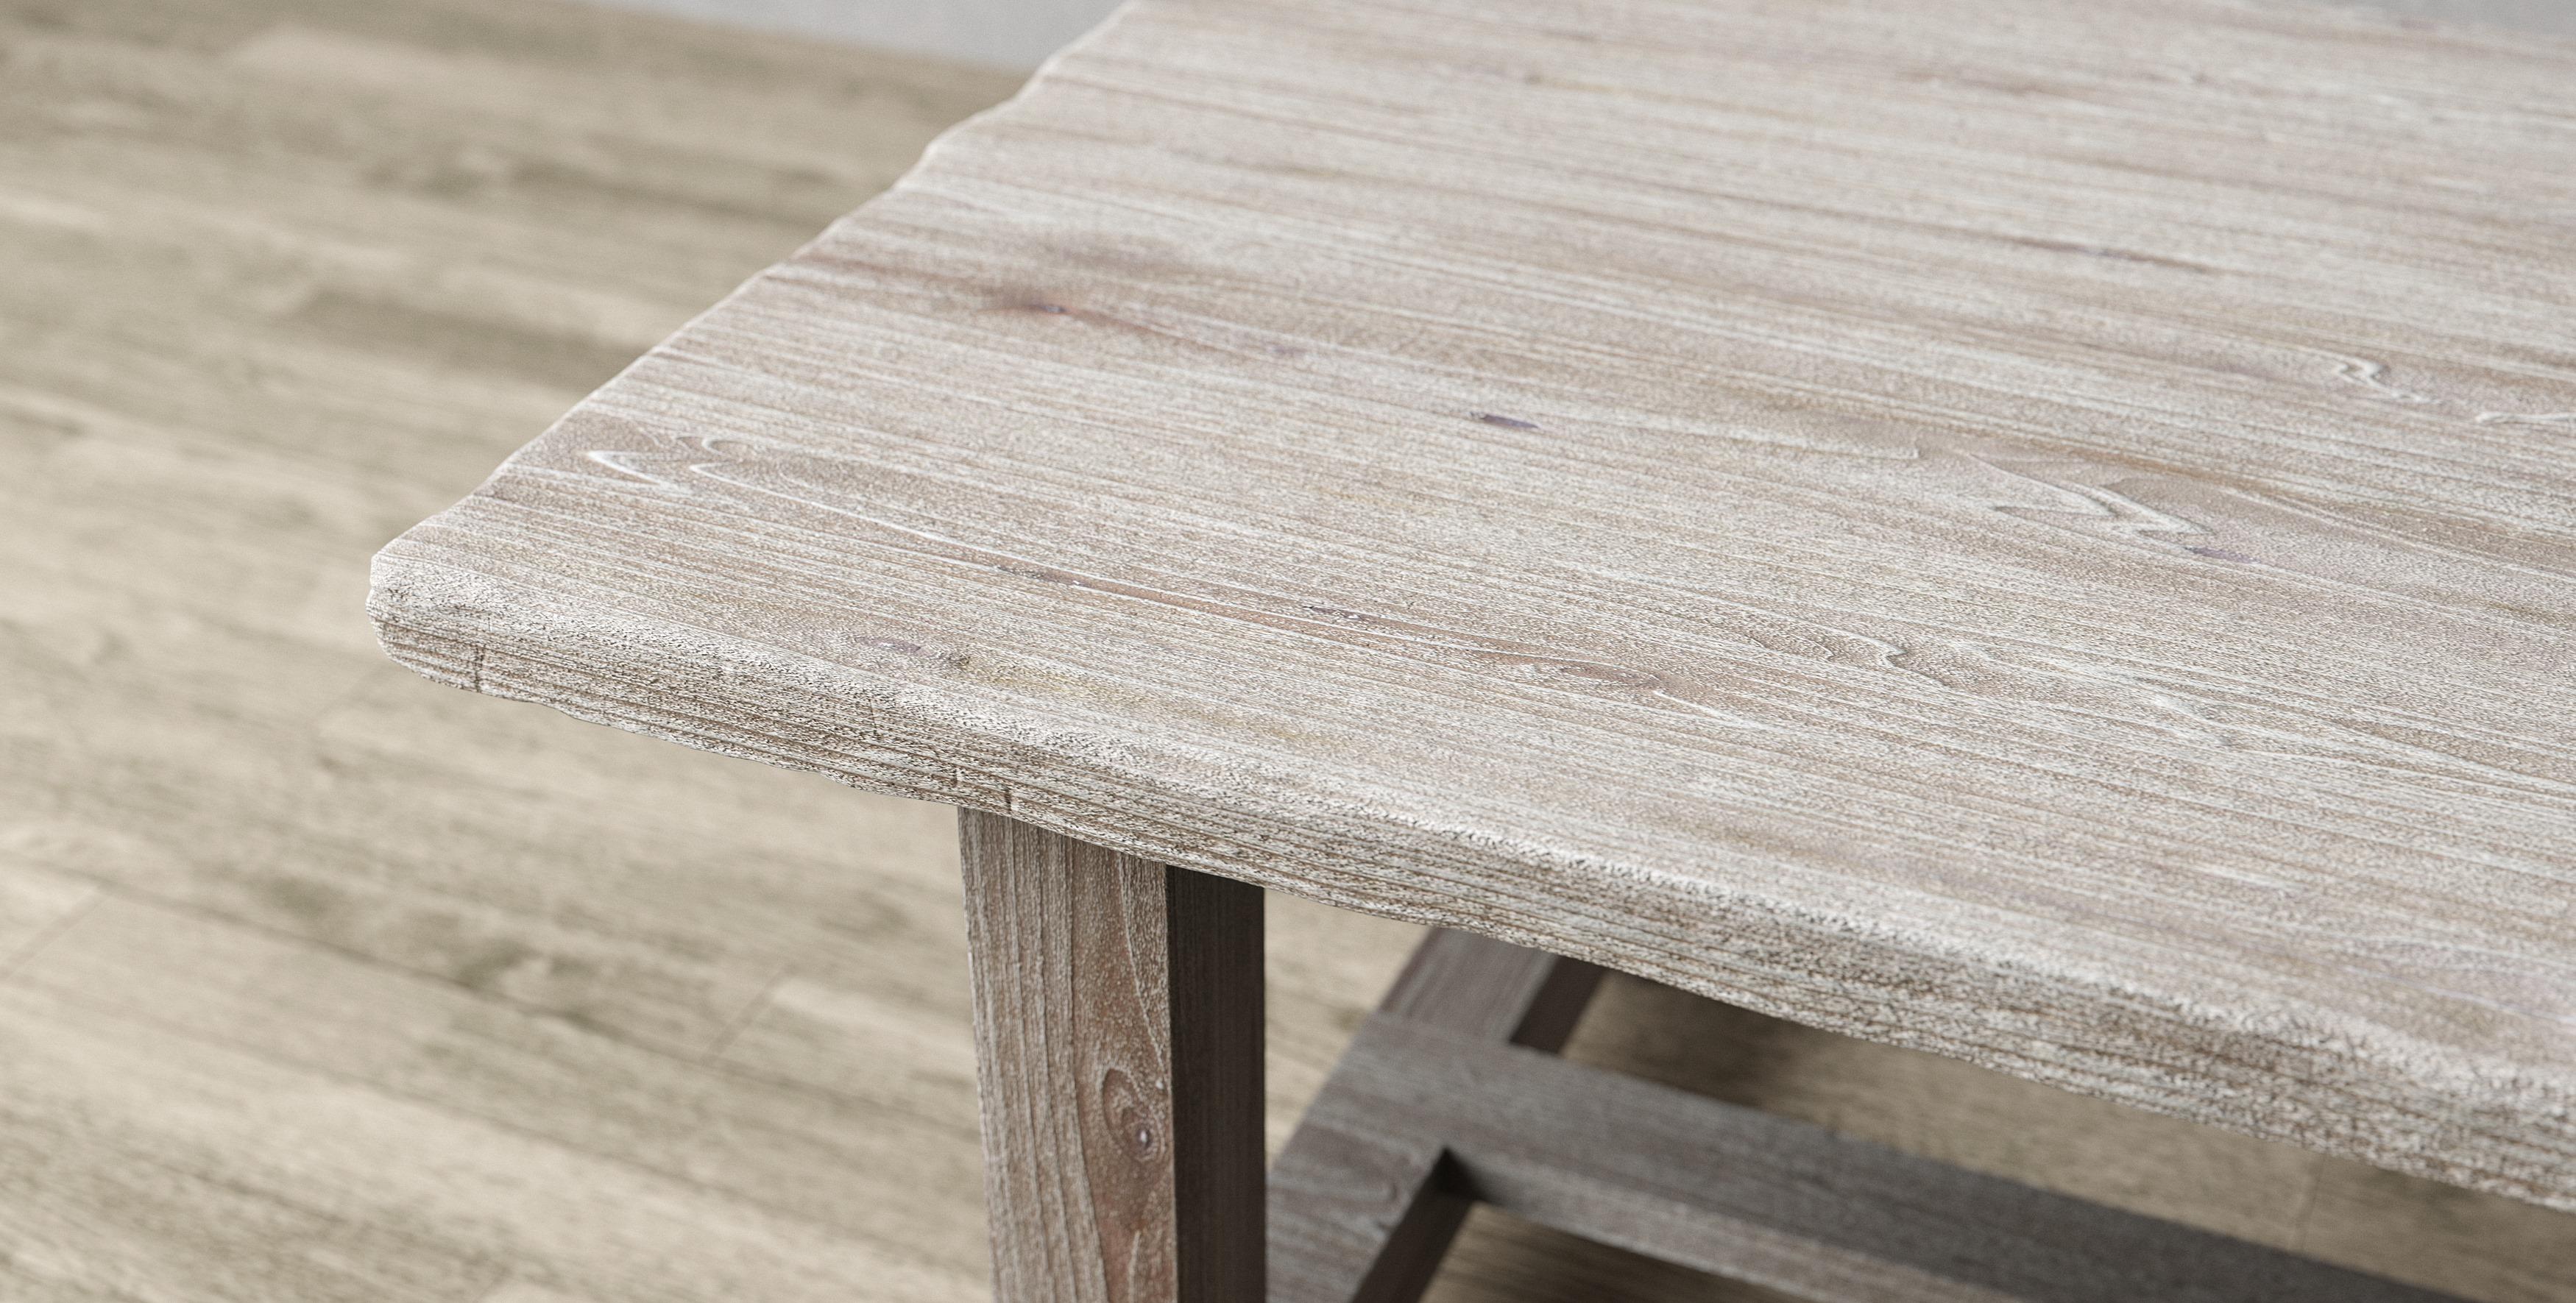 This table celebrates the natural beauty of solid wood with straightforward modern rustic styling. The simplicity of the design and subtle details make this a stunning addition to any home providing beauty that will last for decades.

The Table